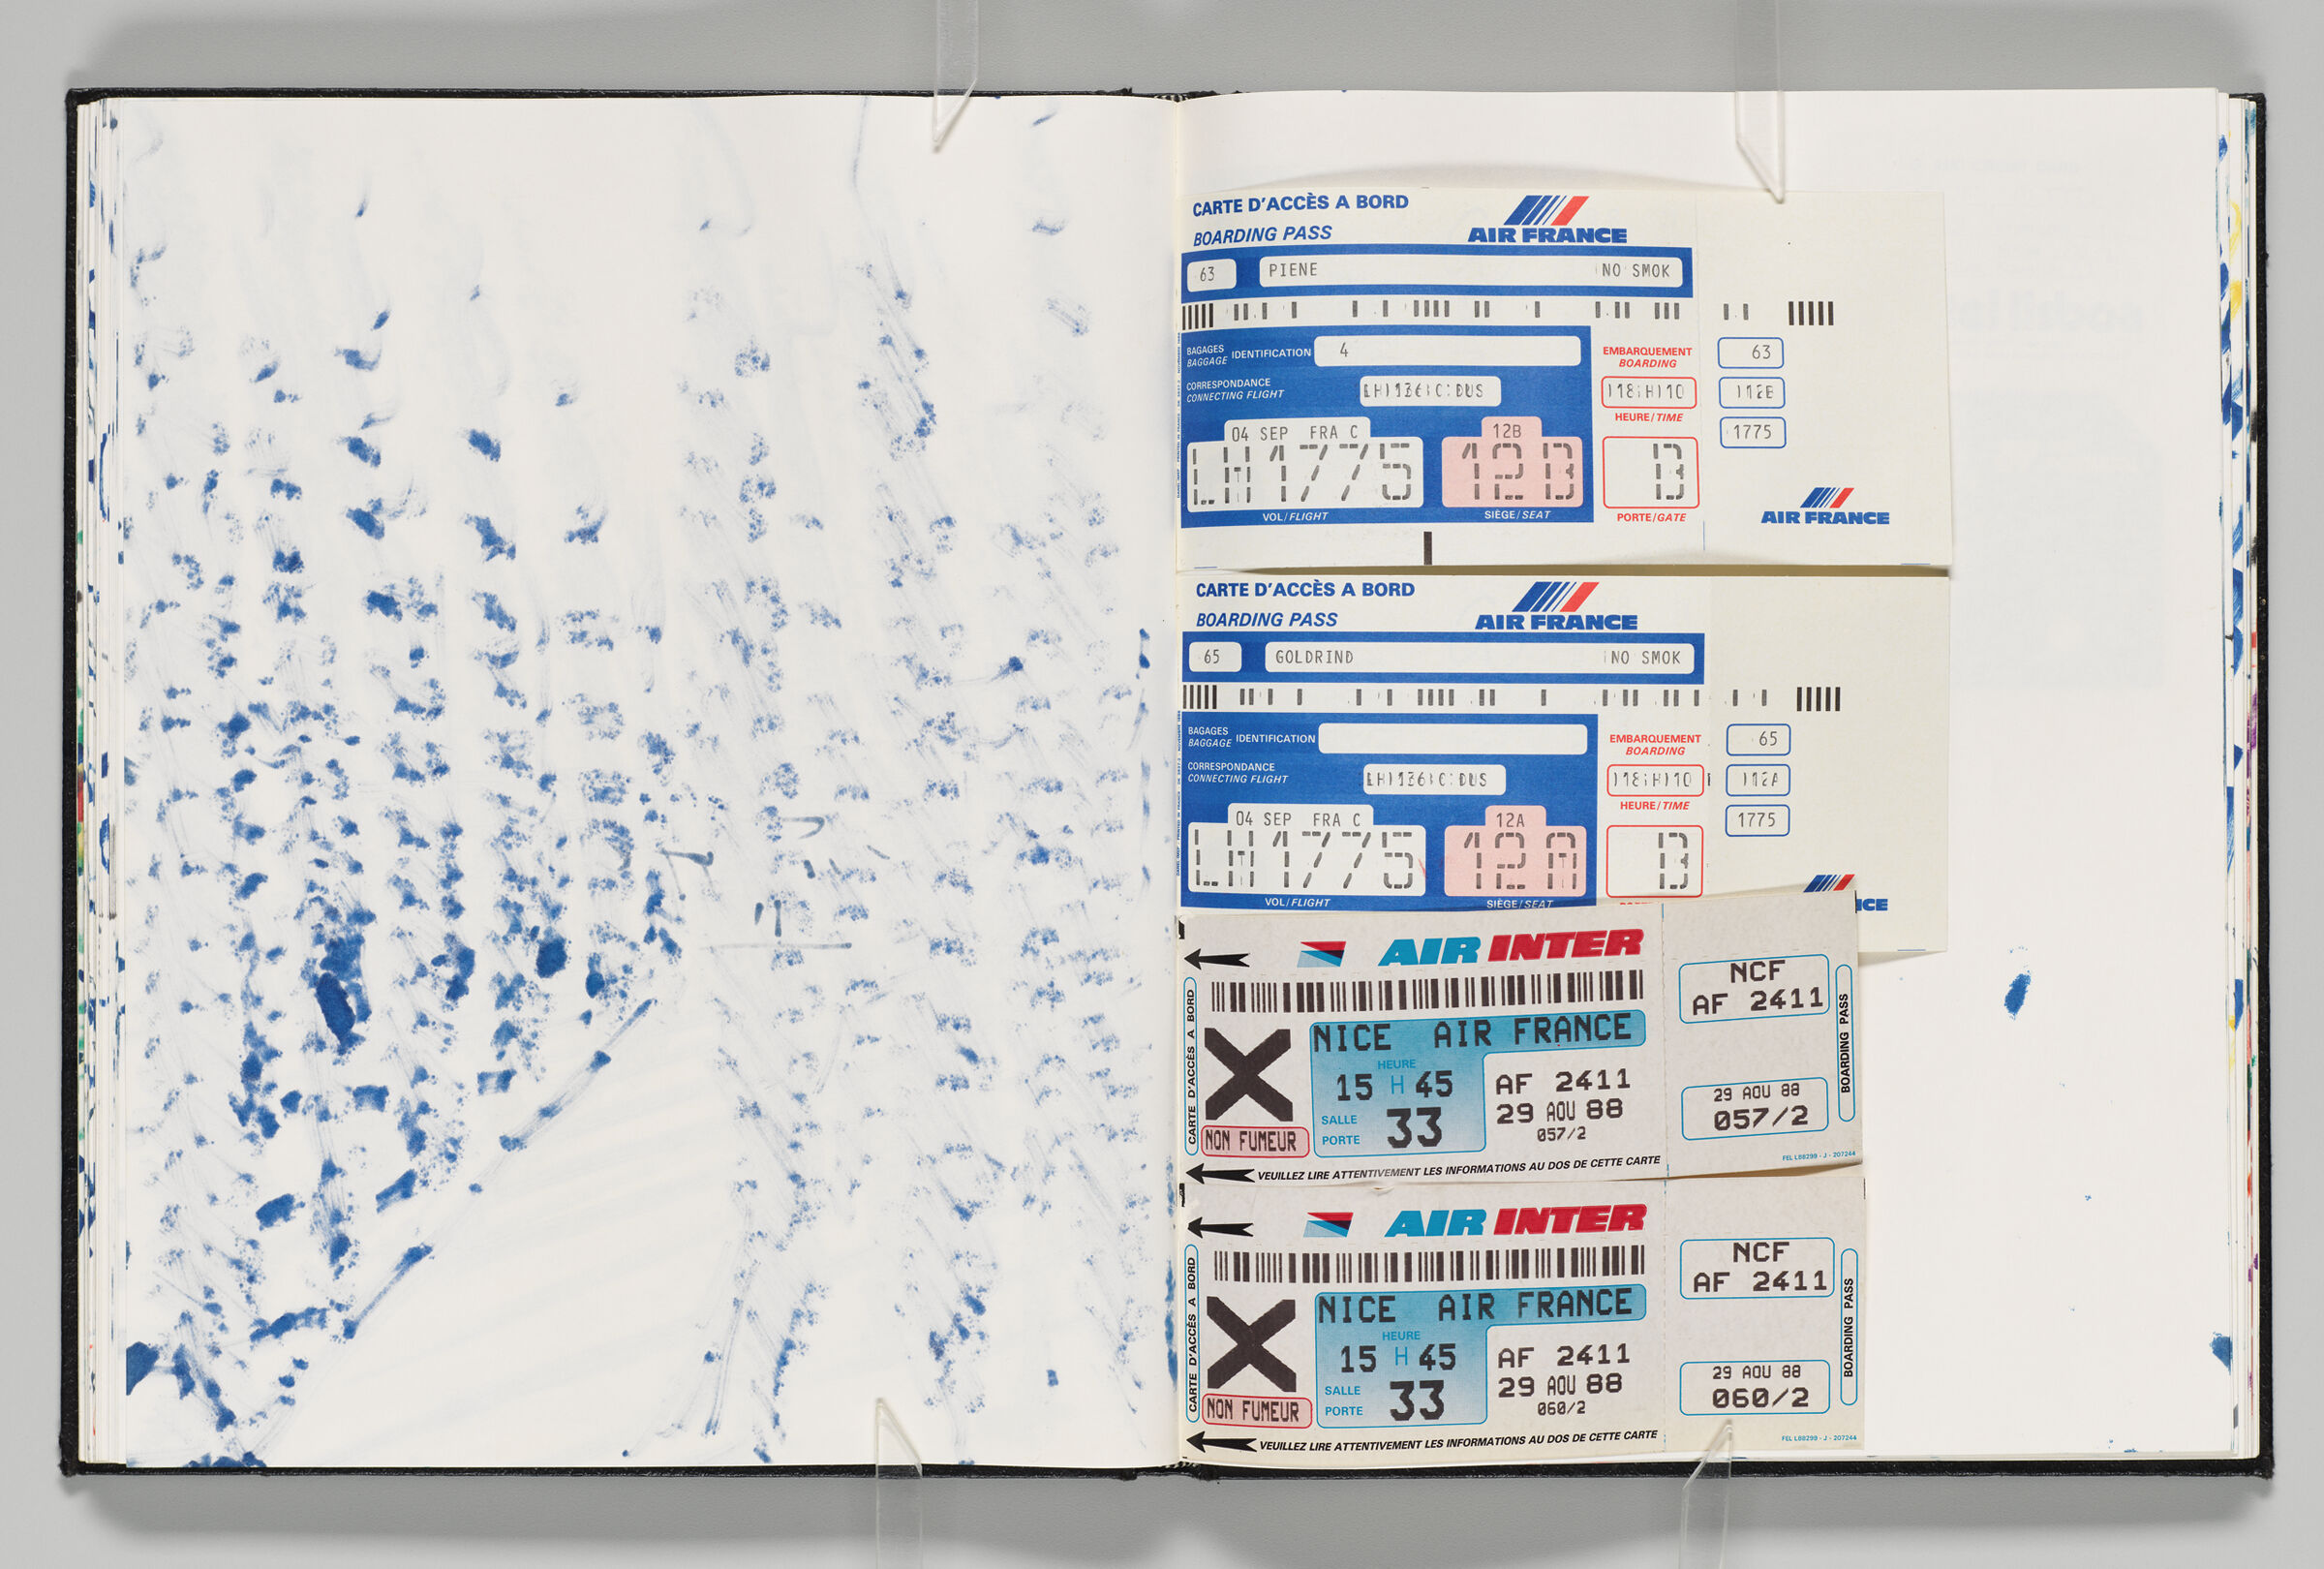 Untitled (Bleed-Through Of Previous Page, Left Page); Untitled (Adhered Air France Boarding Passes, Right Page)